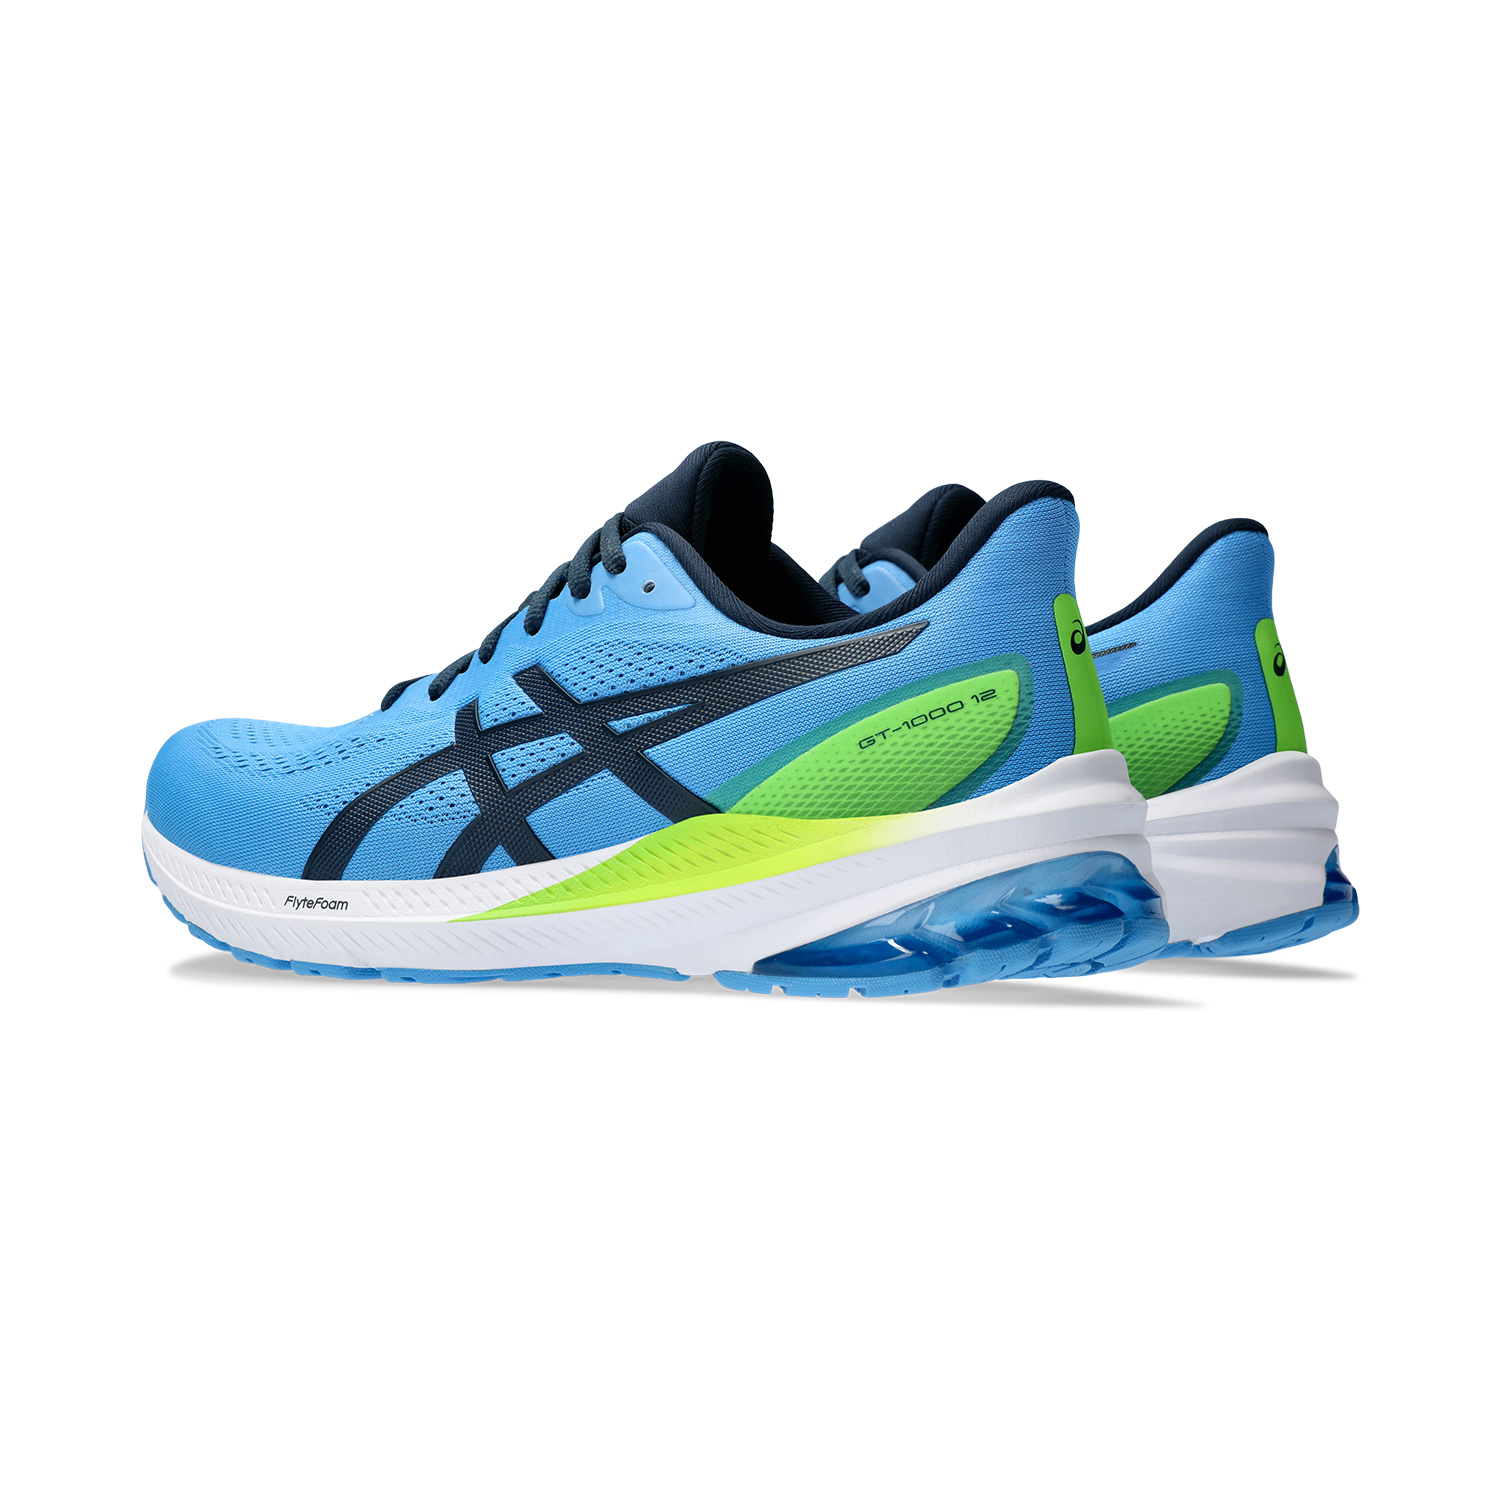 Asics GT 1000 12 - Waterscape/French Blue